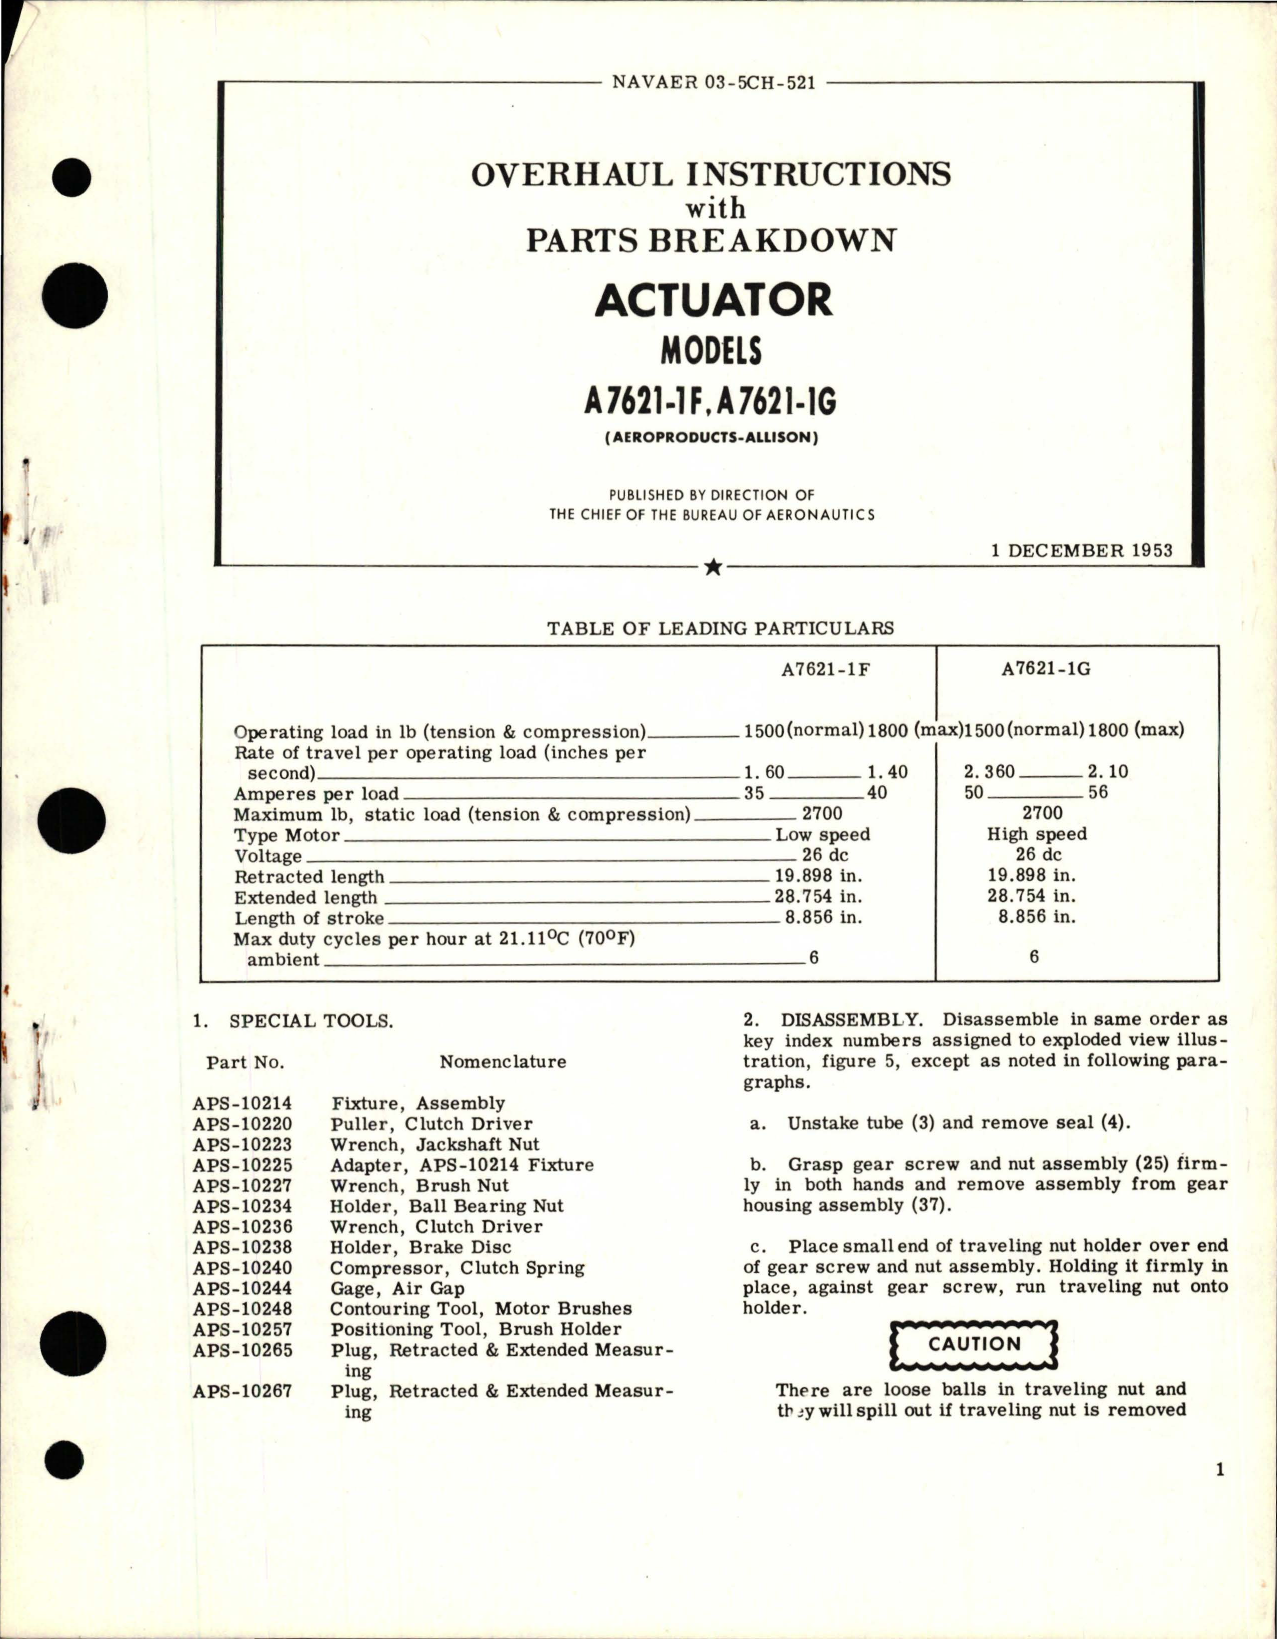 Sample page 1 from AirCorps Library document: Overhaul Instructions with Parts Breakdown for Actuator - Models A7621-1F and A7621-1G